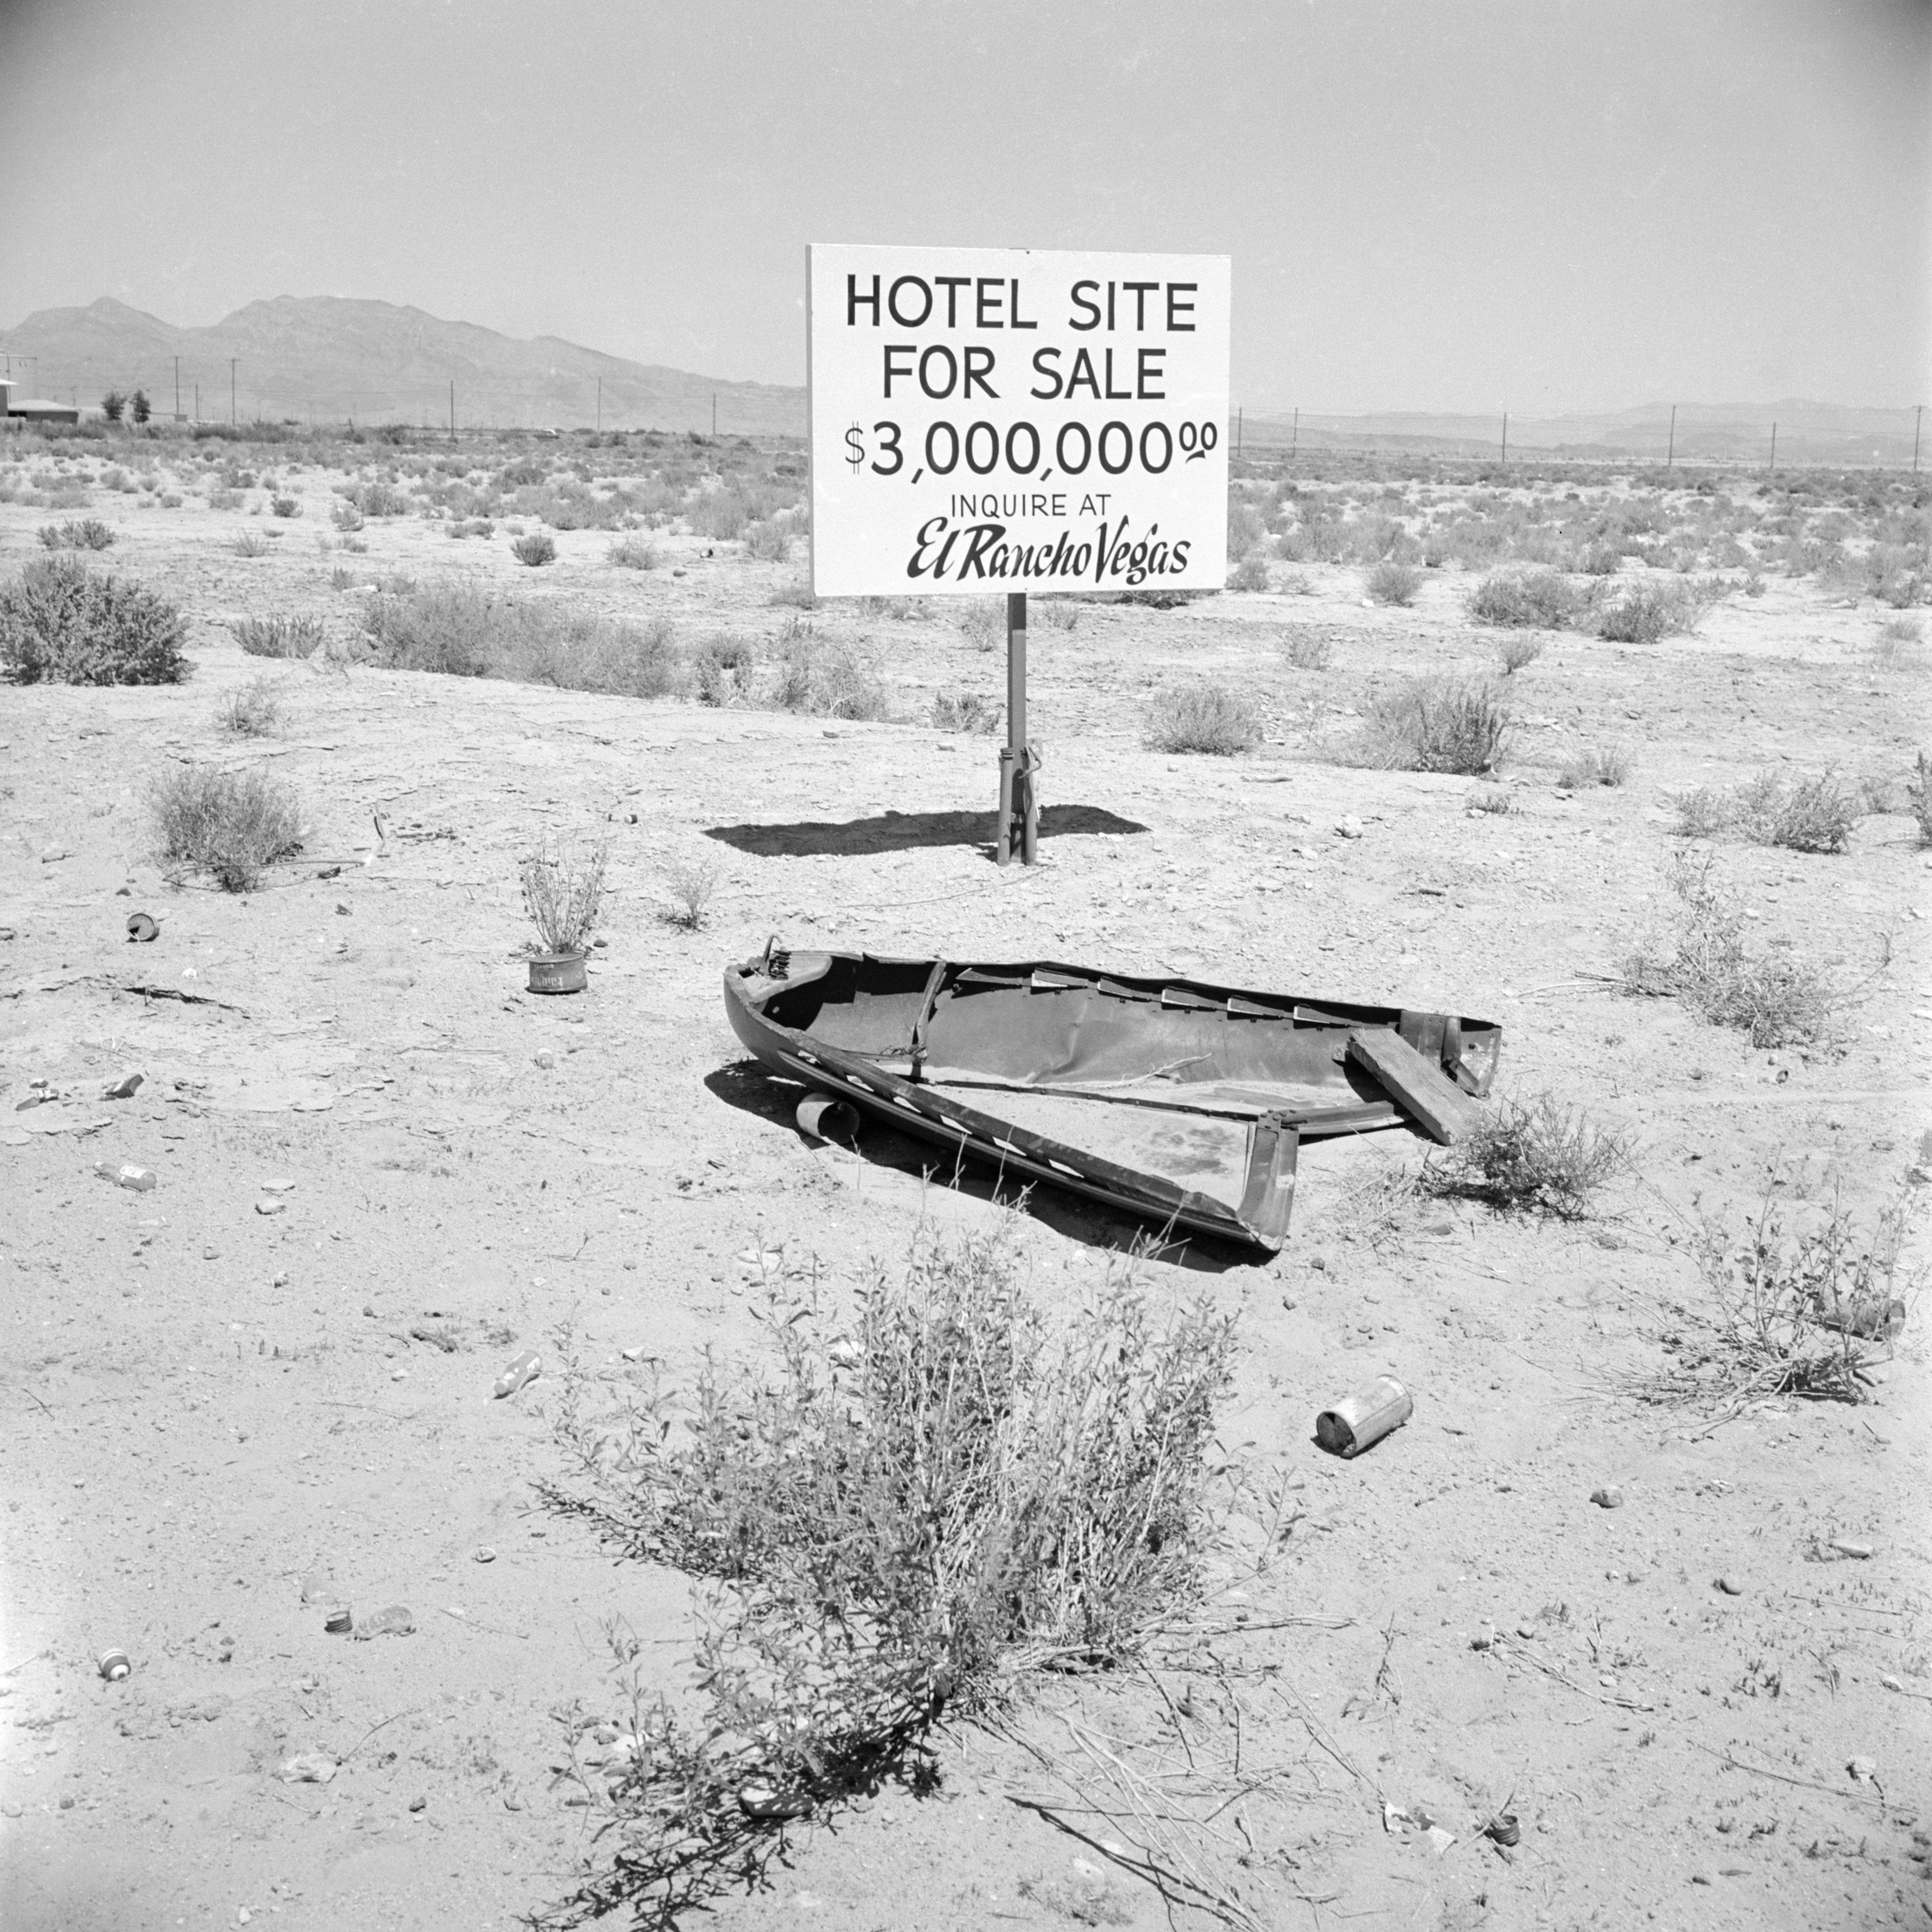 &quot;Hotel site for sale&quot; sign in the middle of an arid landscape